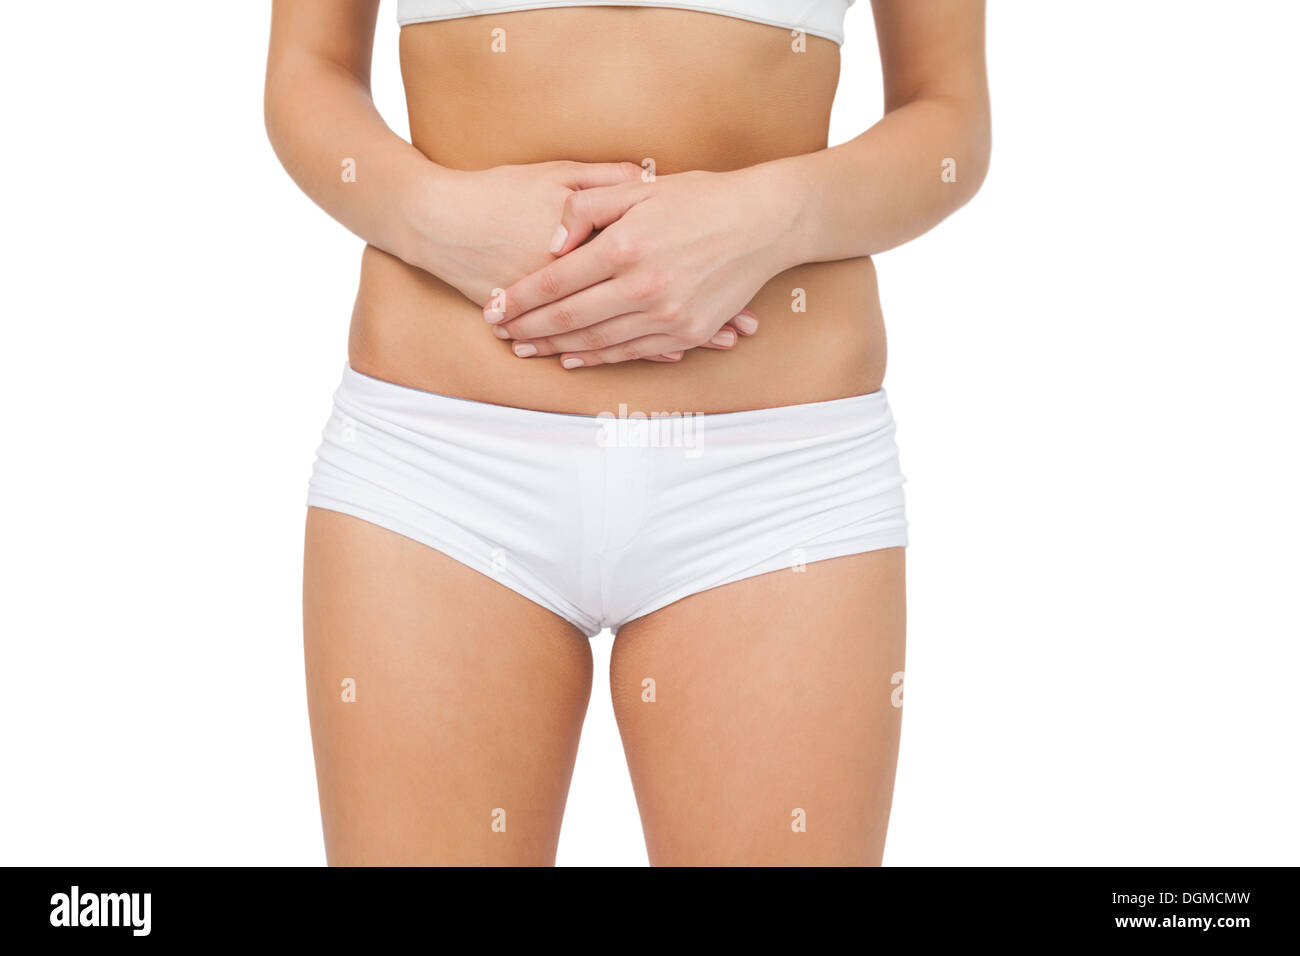 Mid section of woman touching her belly with her hands Stock Photo